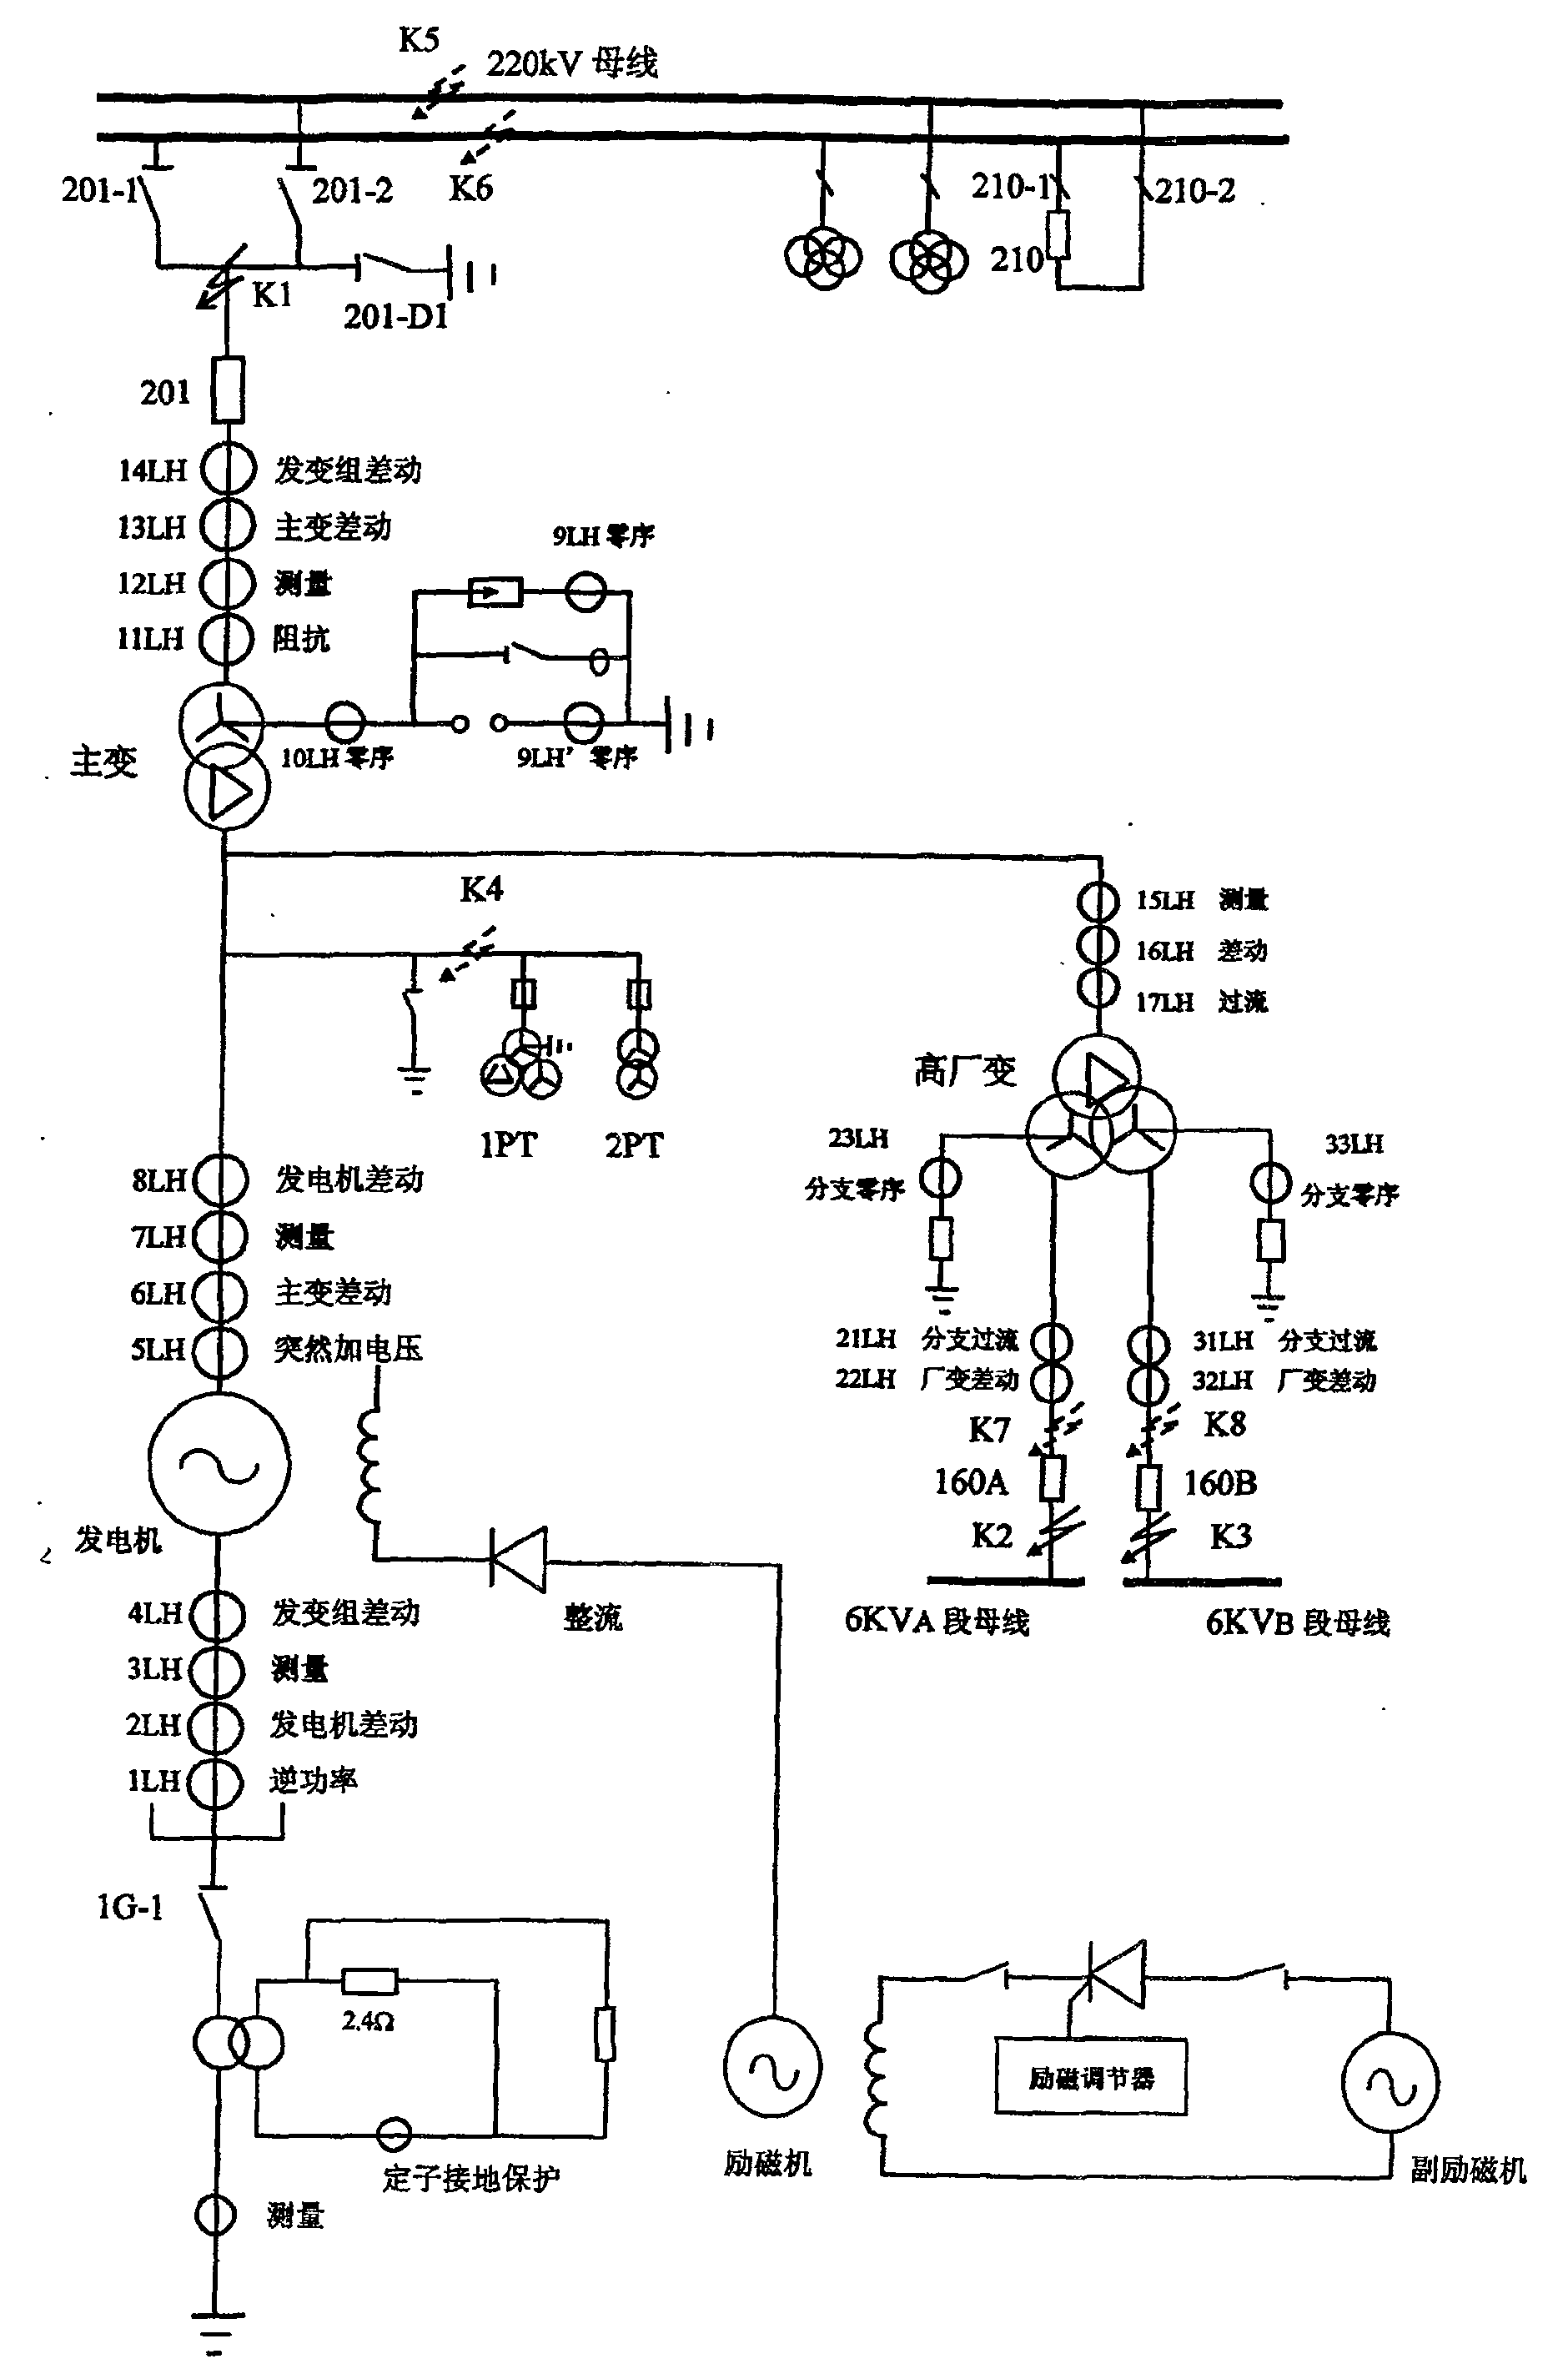 Method for testing electric secondary AC loop